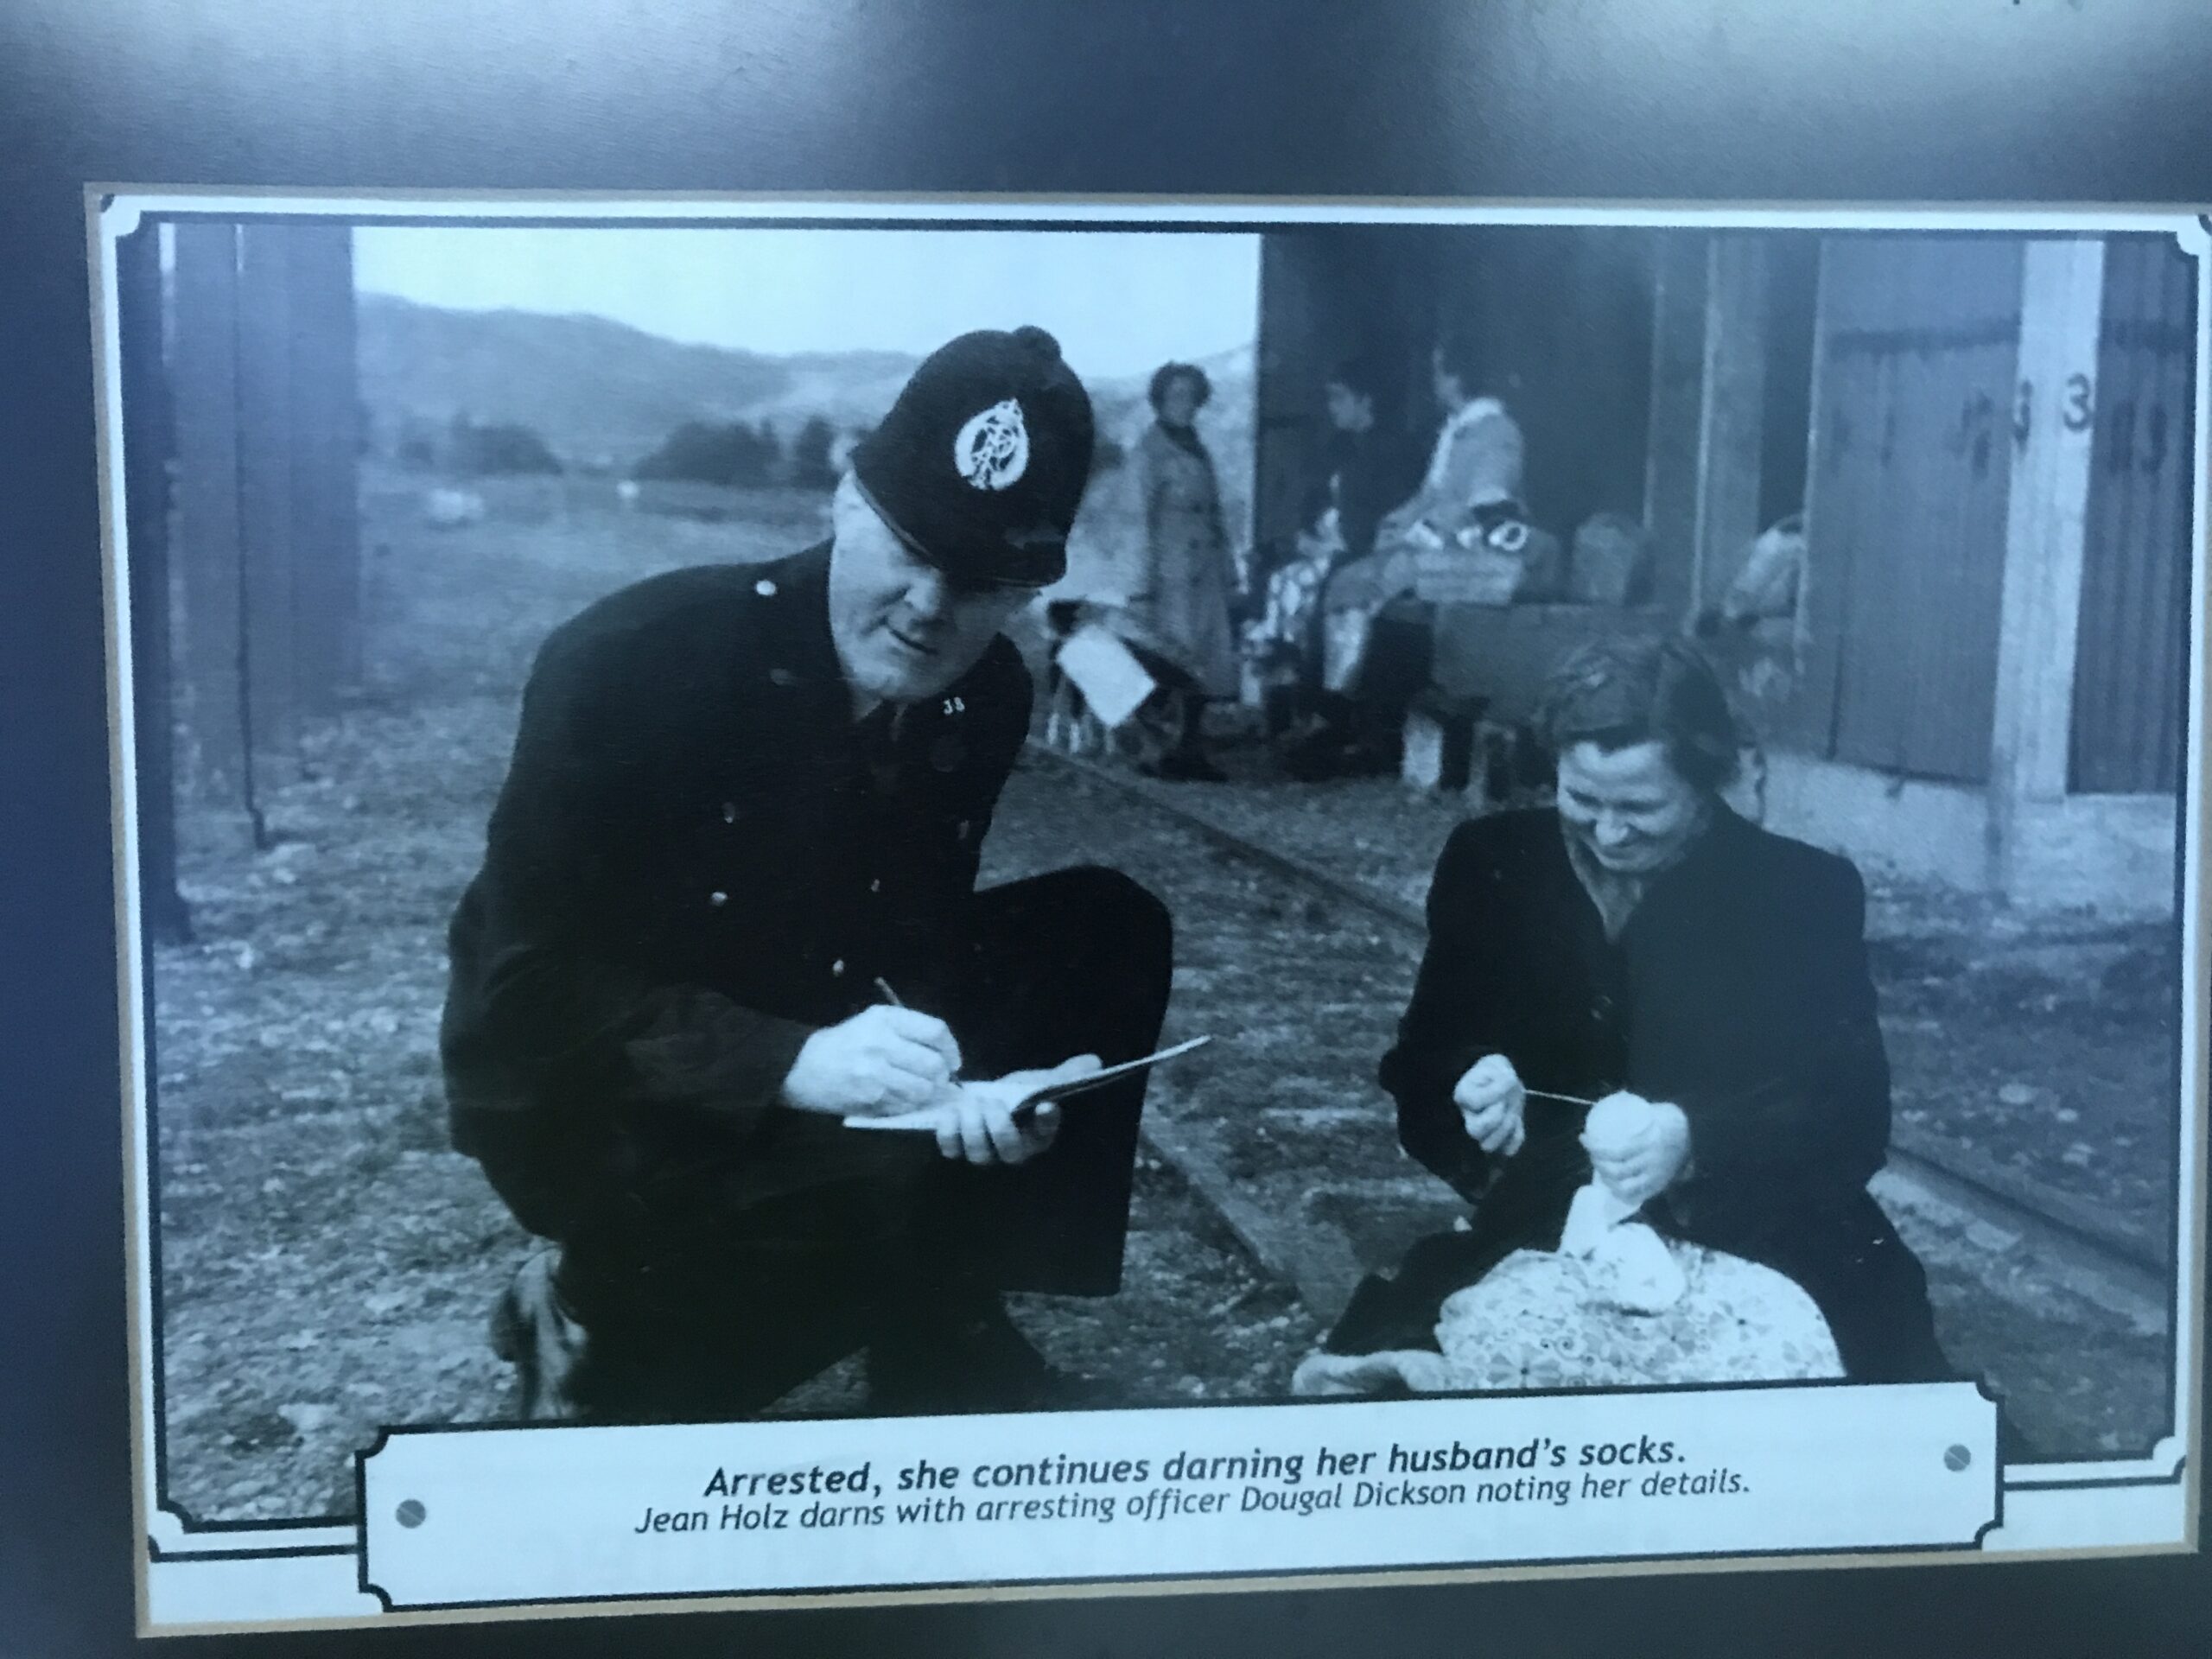 A lady sits on some railroad tracks darning socks. She's looking downwards and smiling. A police officer crouches beside her and looks at the camera while writing something in a booklet. The caption at the bottom reads "arrested, she continues darning her husband's socks. Jean Holz darns with arresting officer Dougal Dickson noting her details"